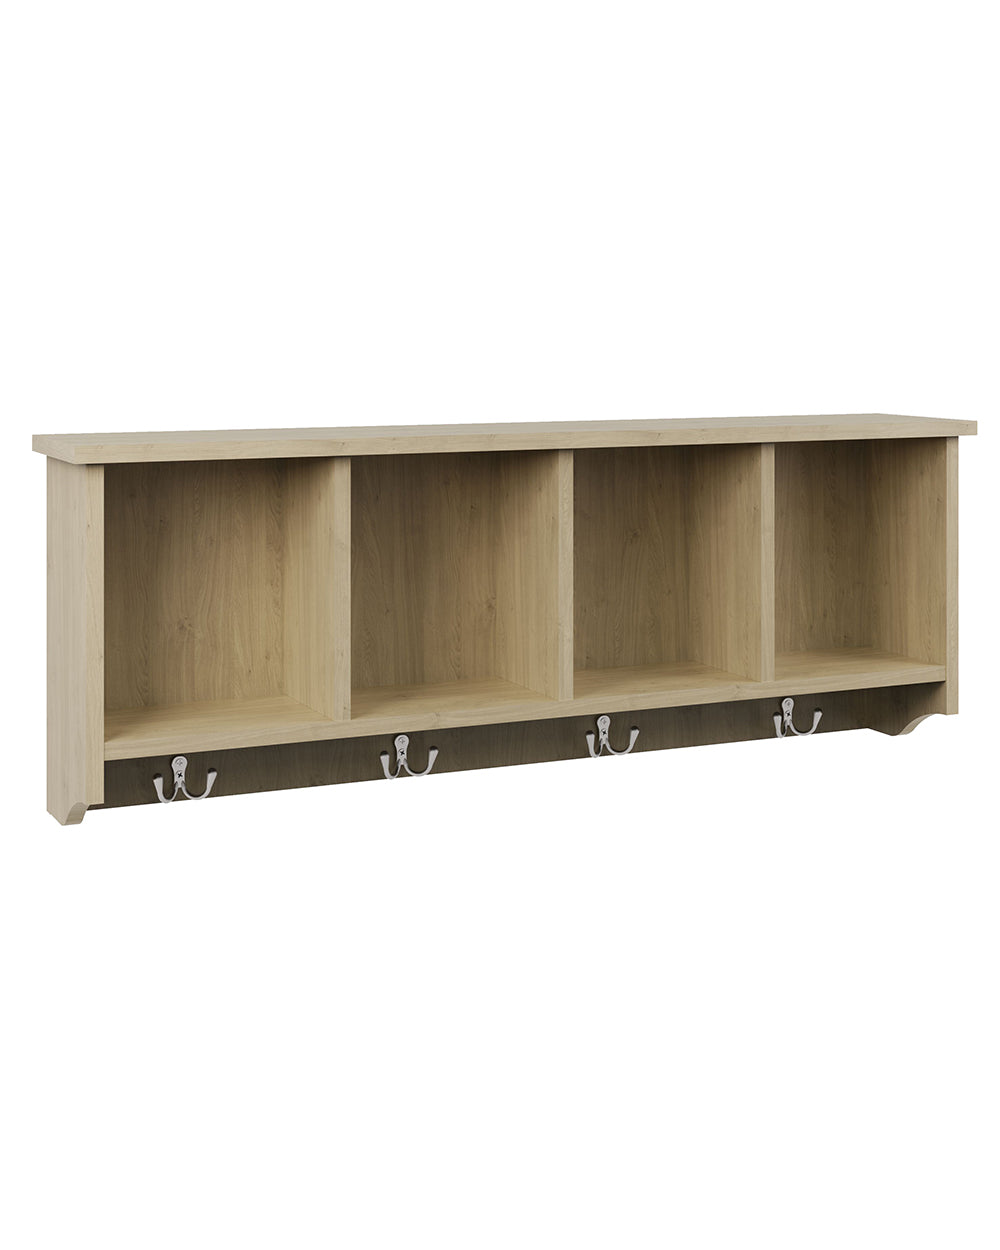 GFW Kempton wall rack oak effect hallway storage unit featured on a white cut out background